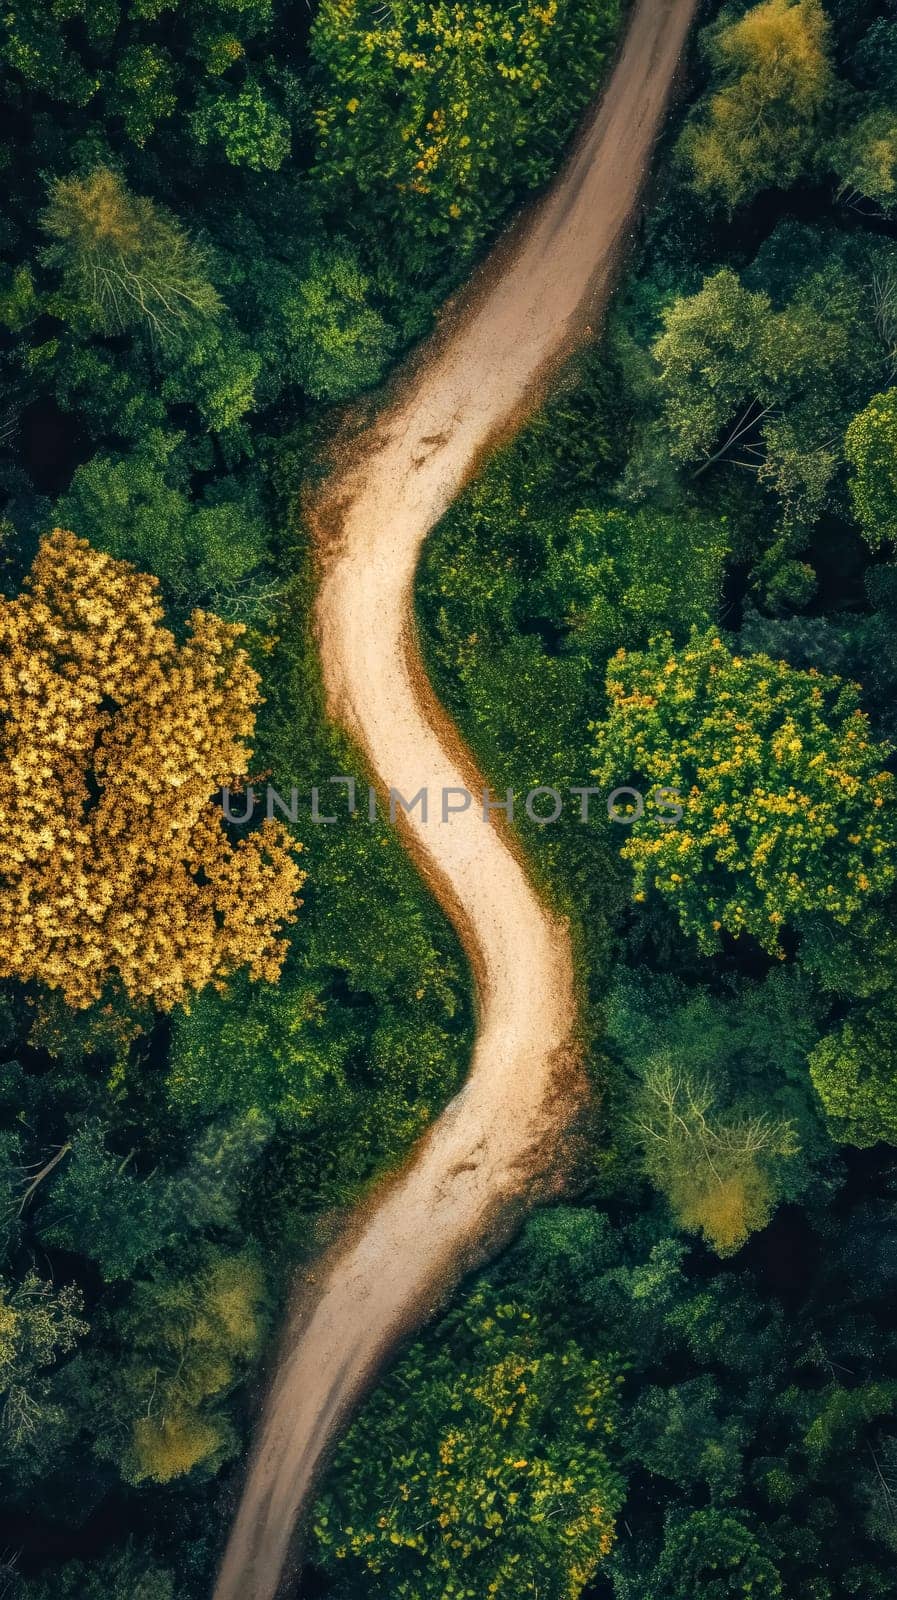 bird's-eye view of a winding dirt path splitting into two separate trails amidst a dense green forest, embodying the metaphor of choice and the divergent paths one can take in life by Edophoto